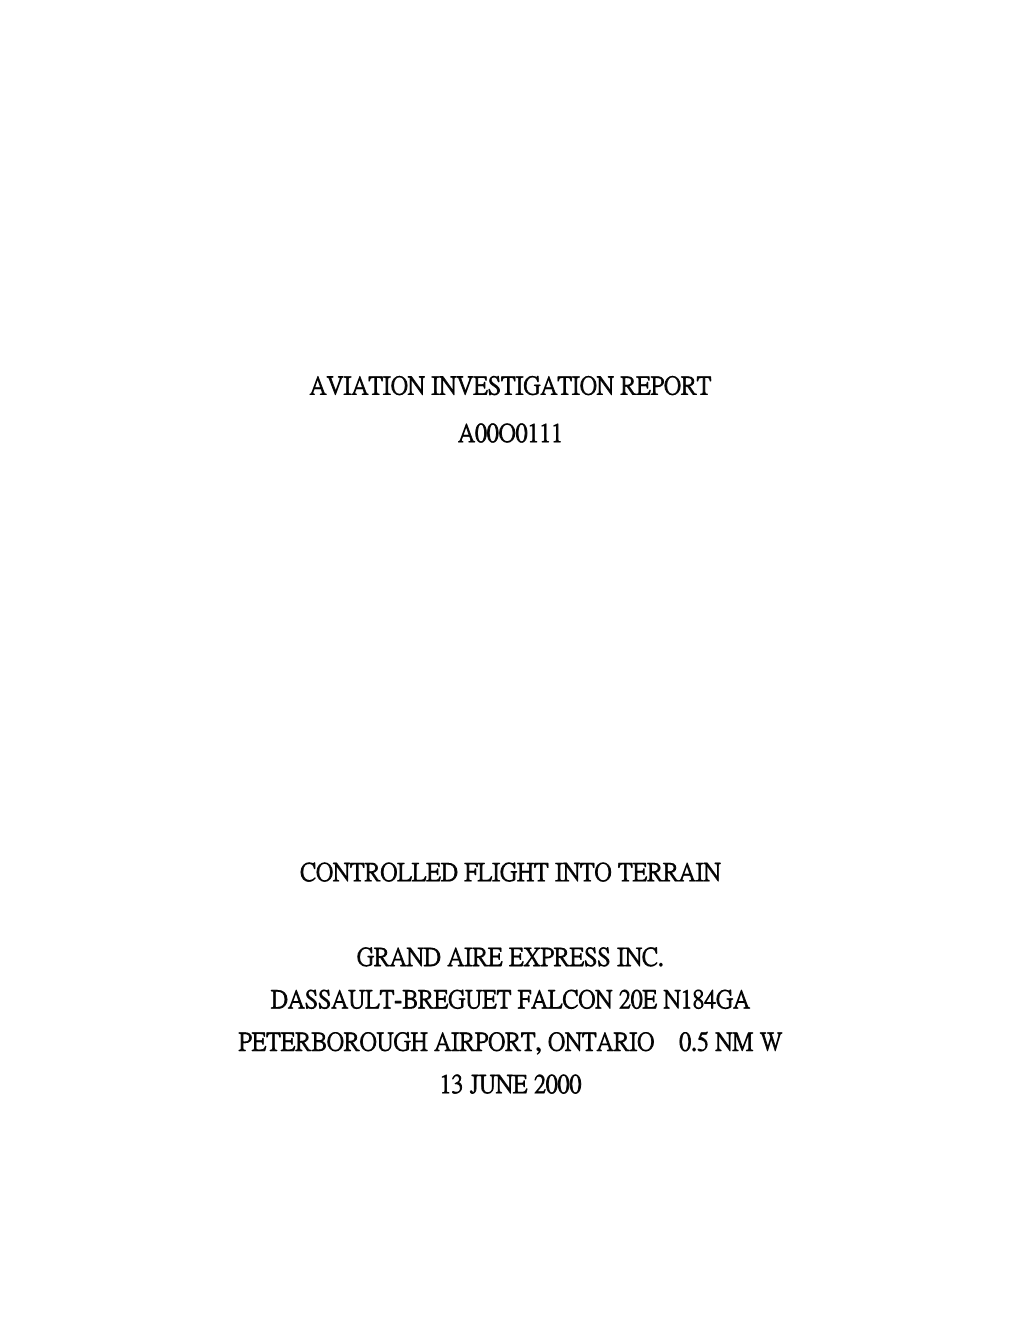 Aviation Investigation Report A00o0111 Controlled Flight